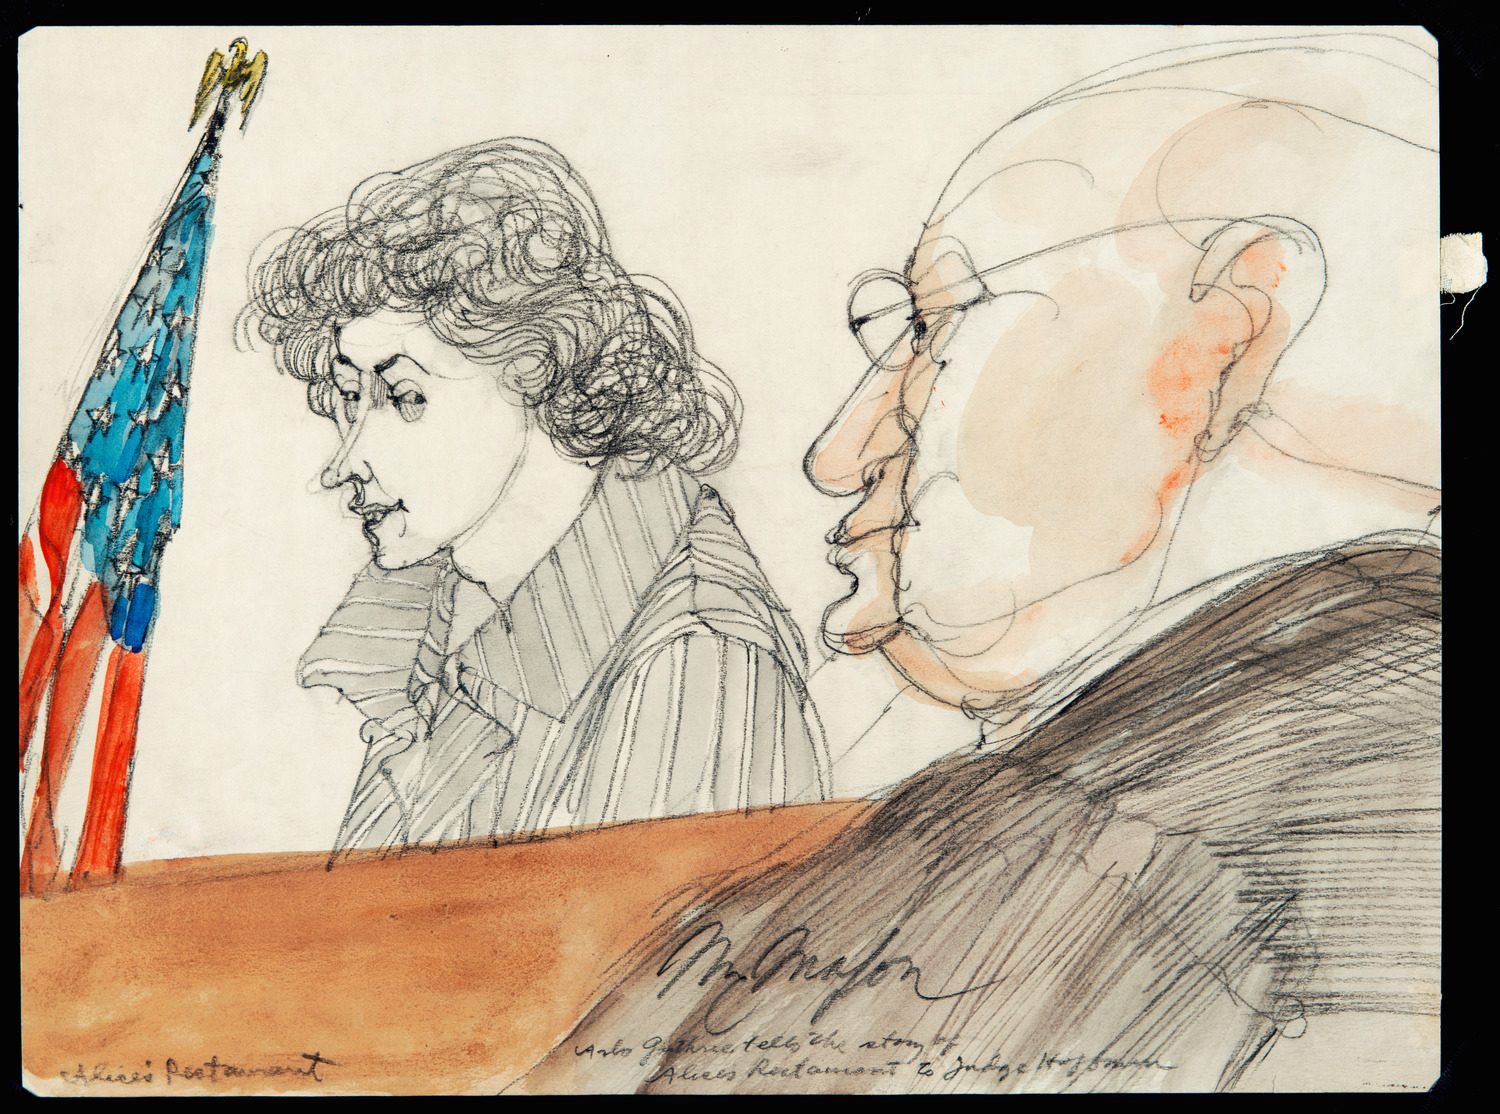 Arlo Guthrie telling story of Alice's Restaurant to Judge Julius Hoffman at Chicago Seven (Chicago Eight) Trial. Courtroom illustration by Franklin McMahon, graphite and watercolor on paper.